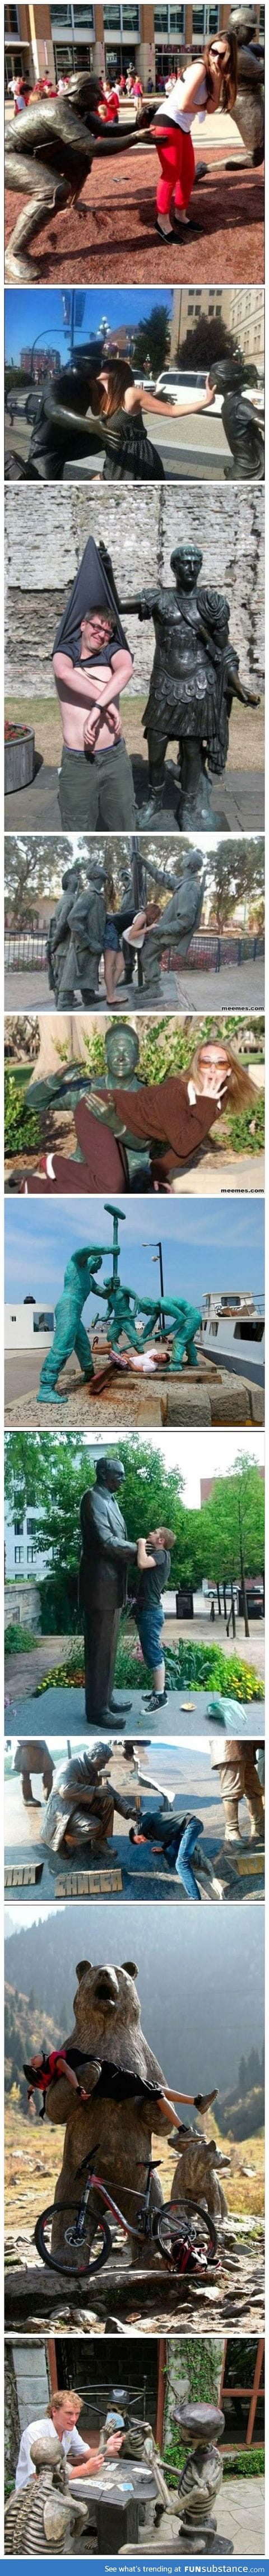 Having fun with statues...